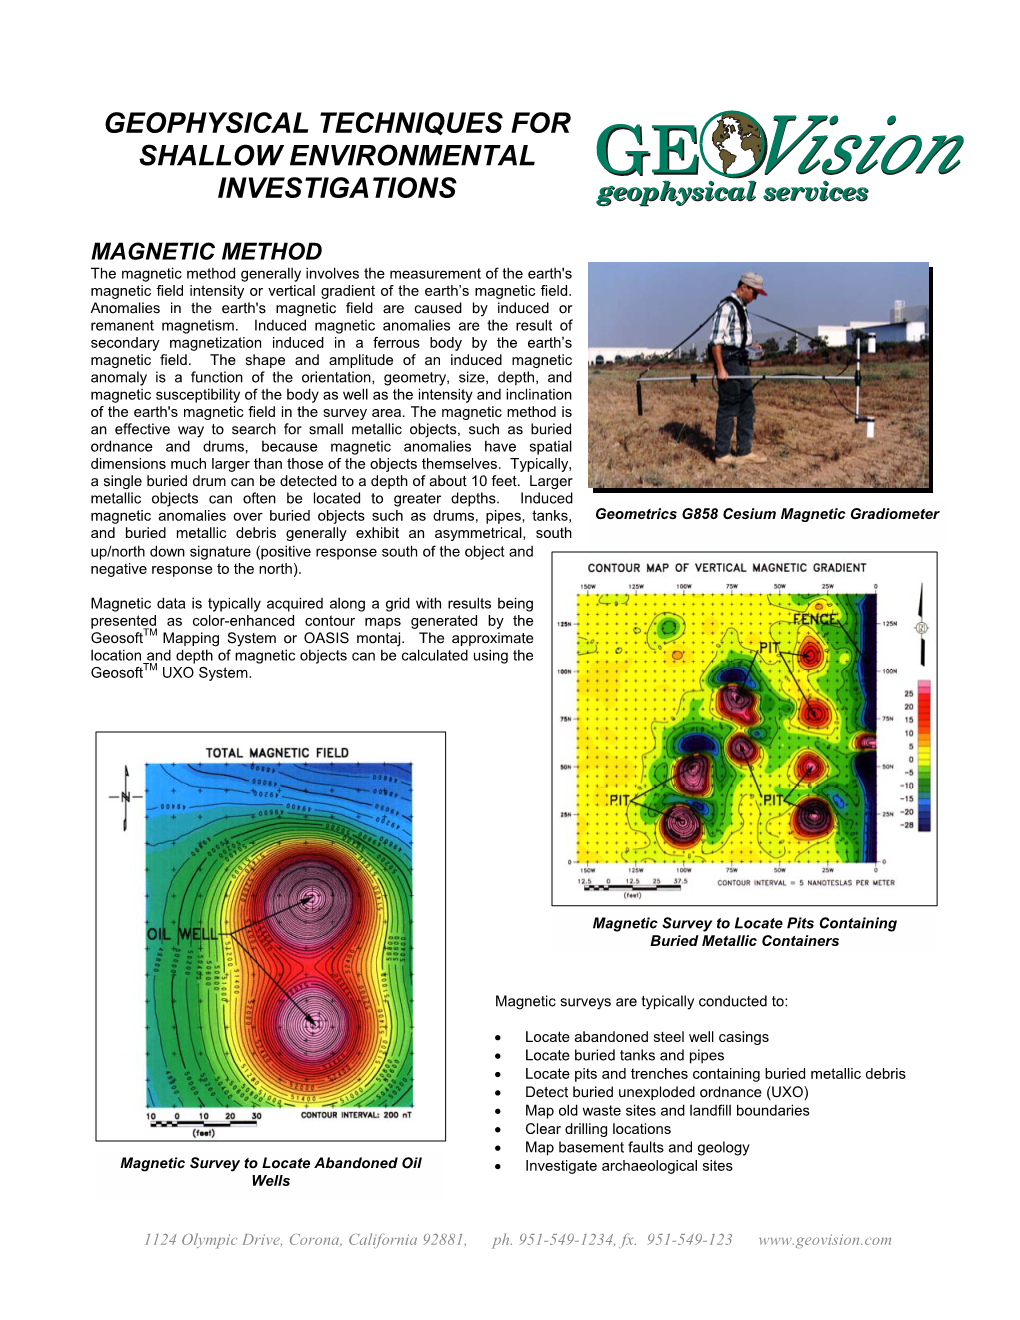 Geophysical Techniques for Shallow Environmental Investigations